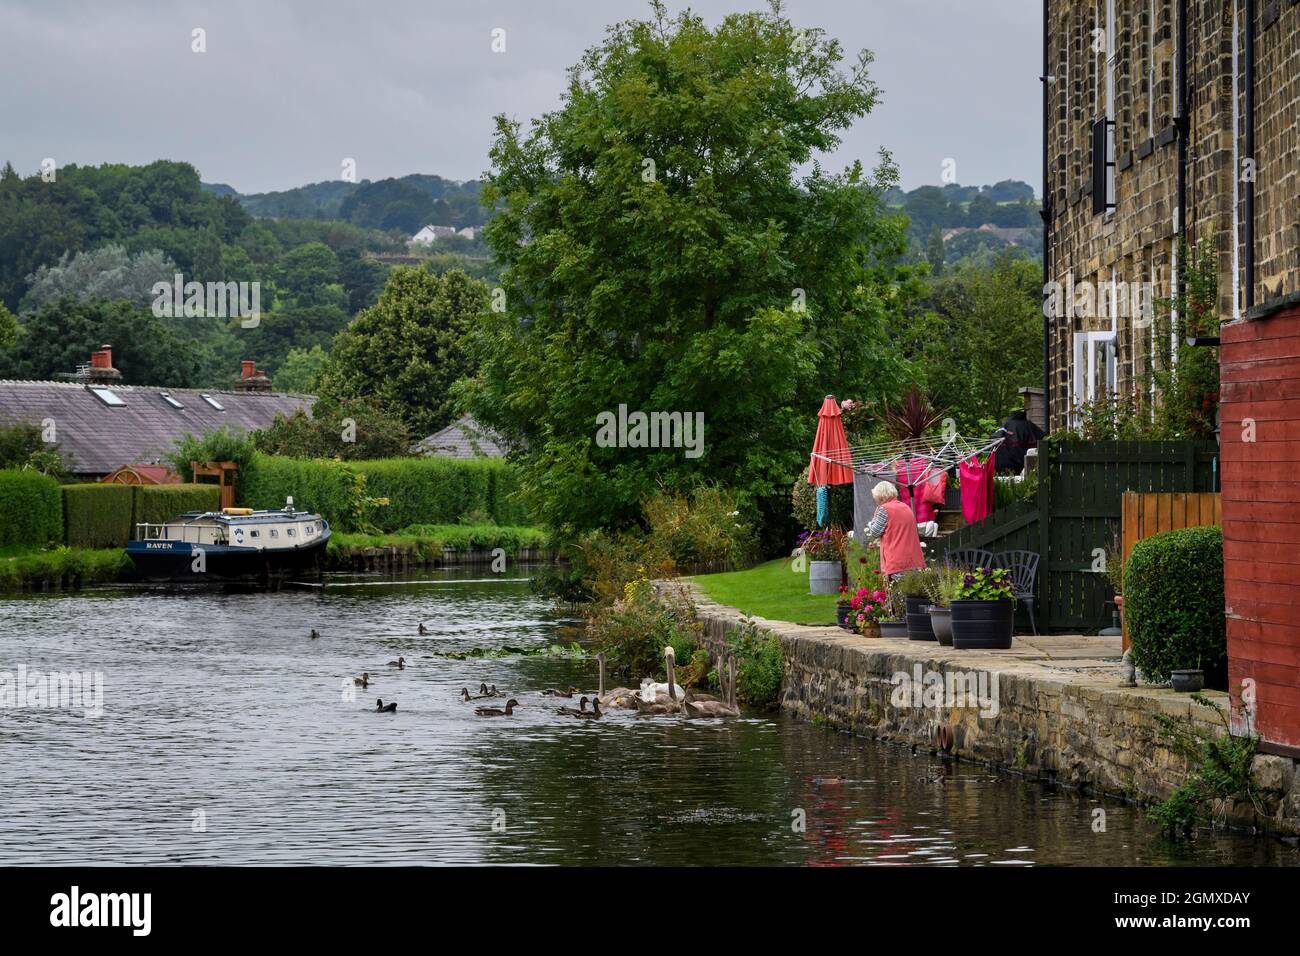 Lady feeding water birds from house garden (old Victorian textile mill) & moored narrowboat - on banks of scenic Leeds Liverpool Canal, England, UK. Stock Photo